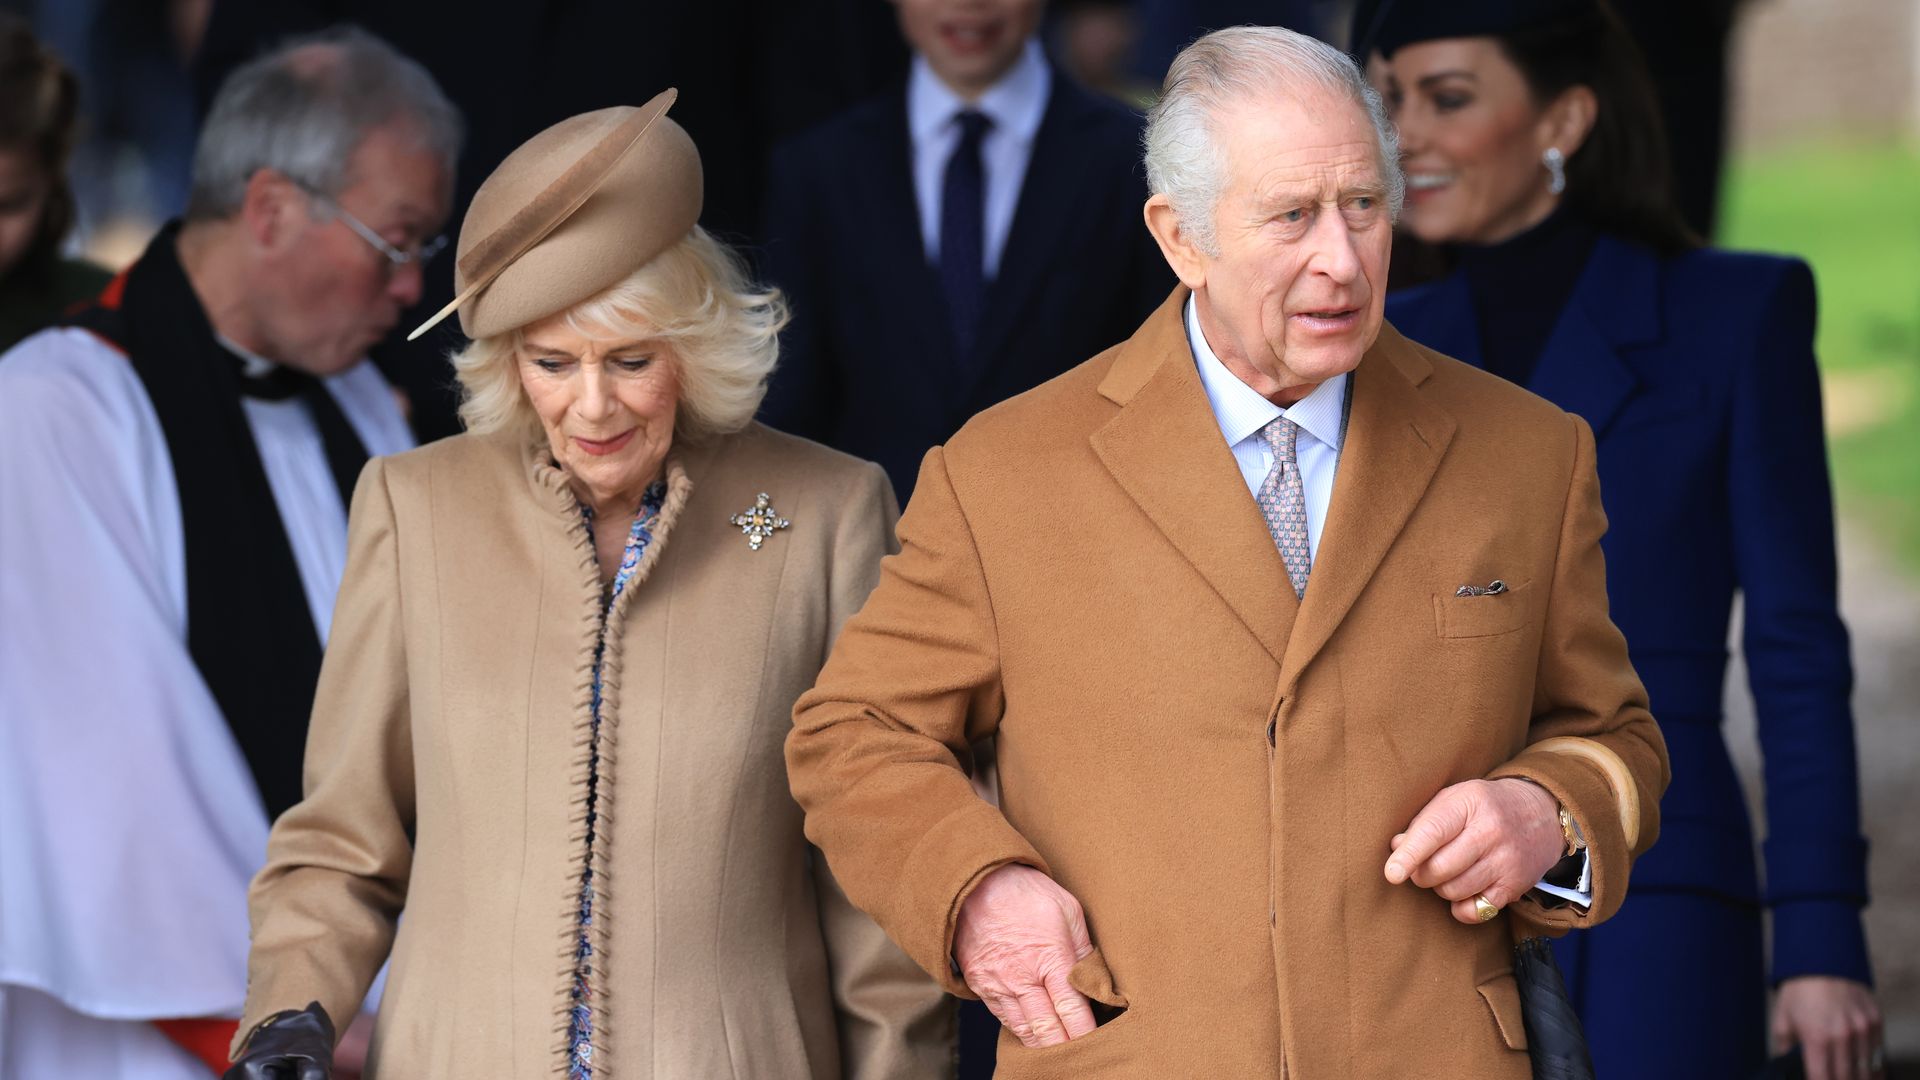 King Charles III and Queen Camilla attend the Christmas Morning Service at Sandringham Church